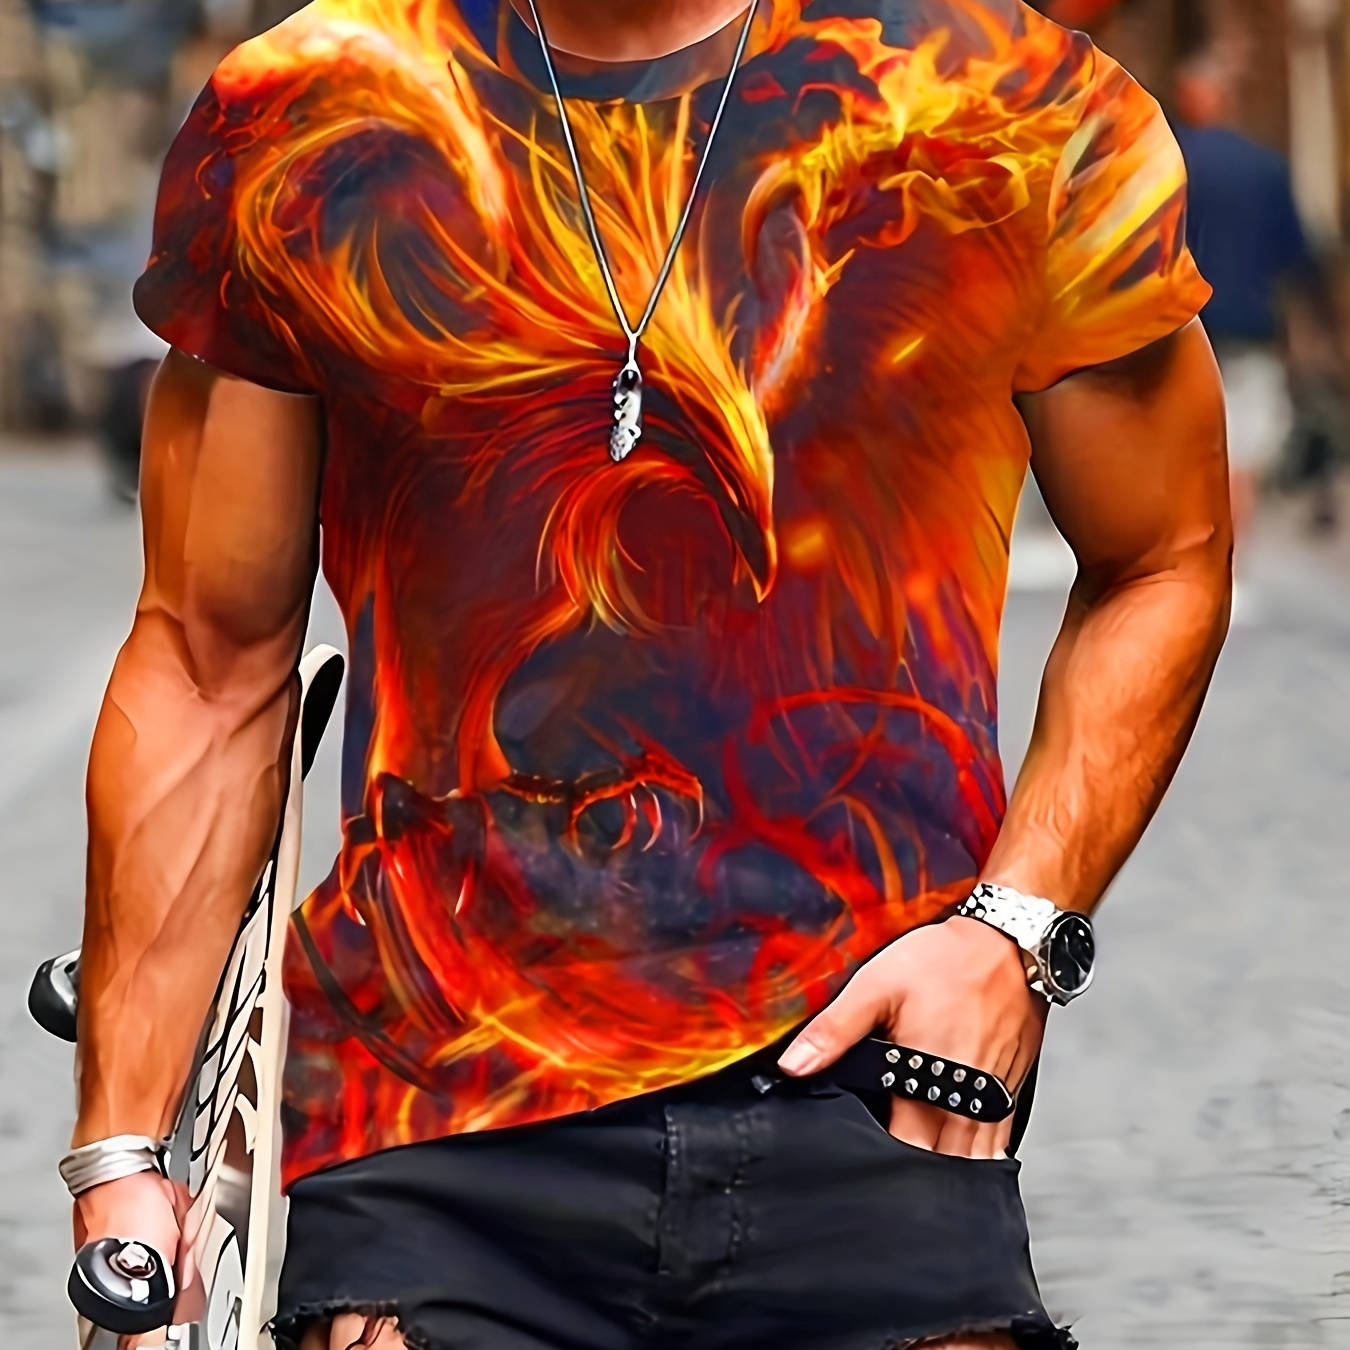 

Stylish Phoenix 3d Digital Pattern Print Men's Graphic T-shirts, Causal Comfy Tees, Short Sleeve Pullover Tops, Men's Summer Outdoor Clothing